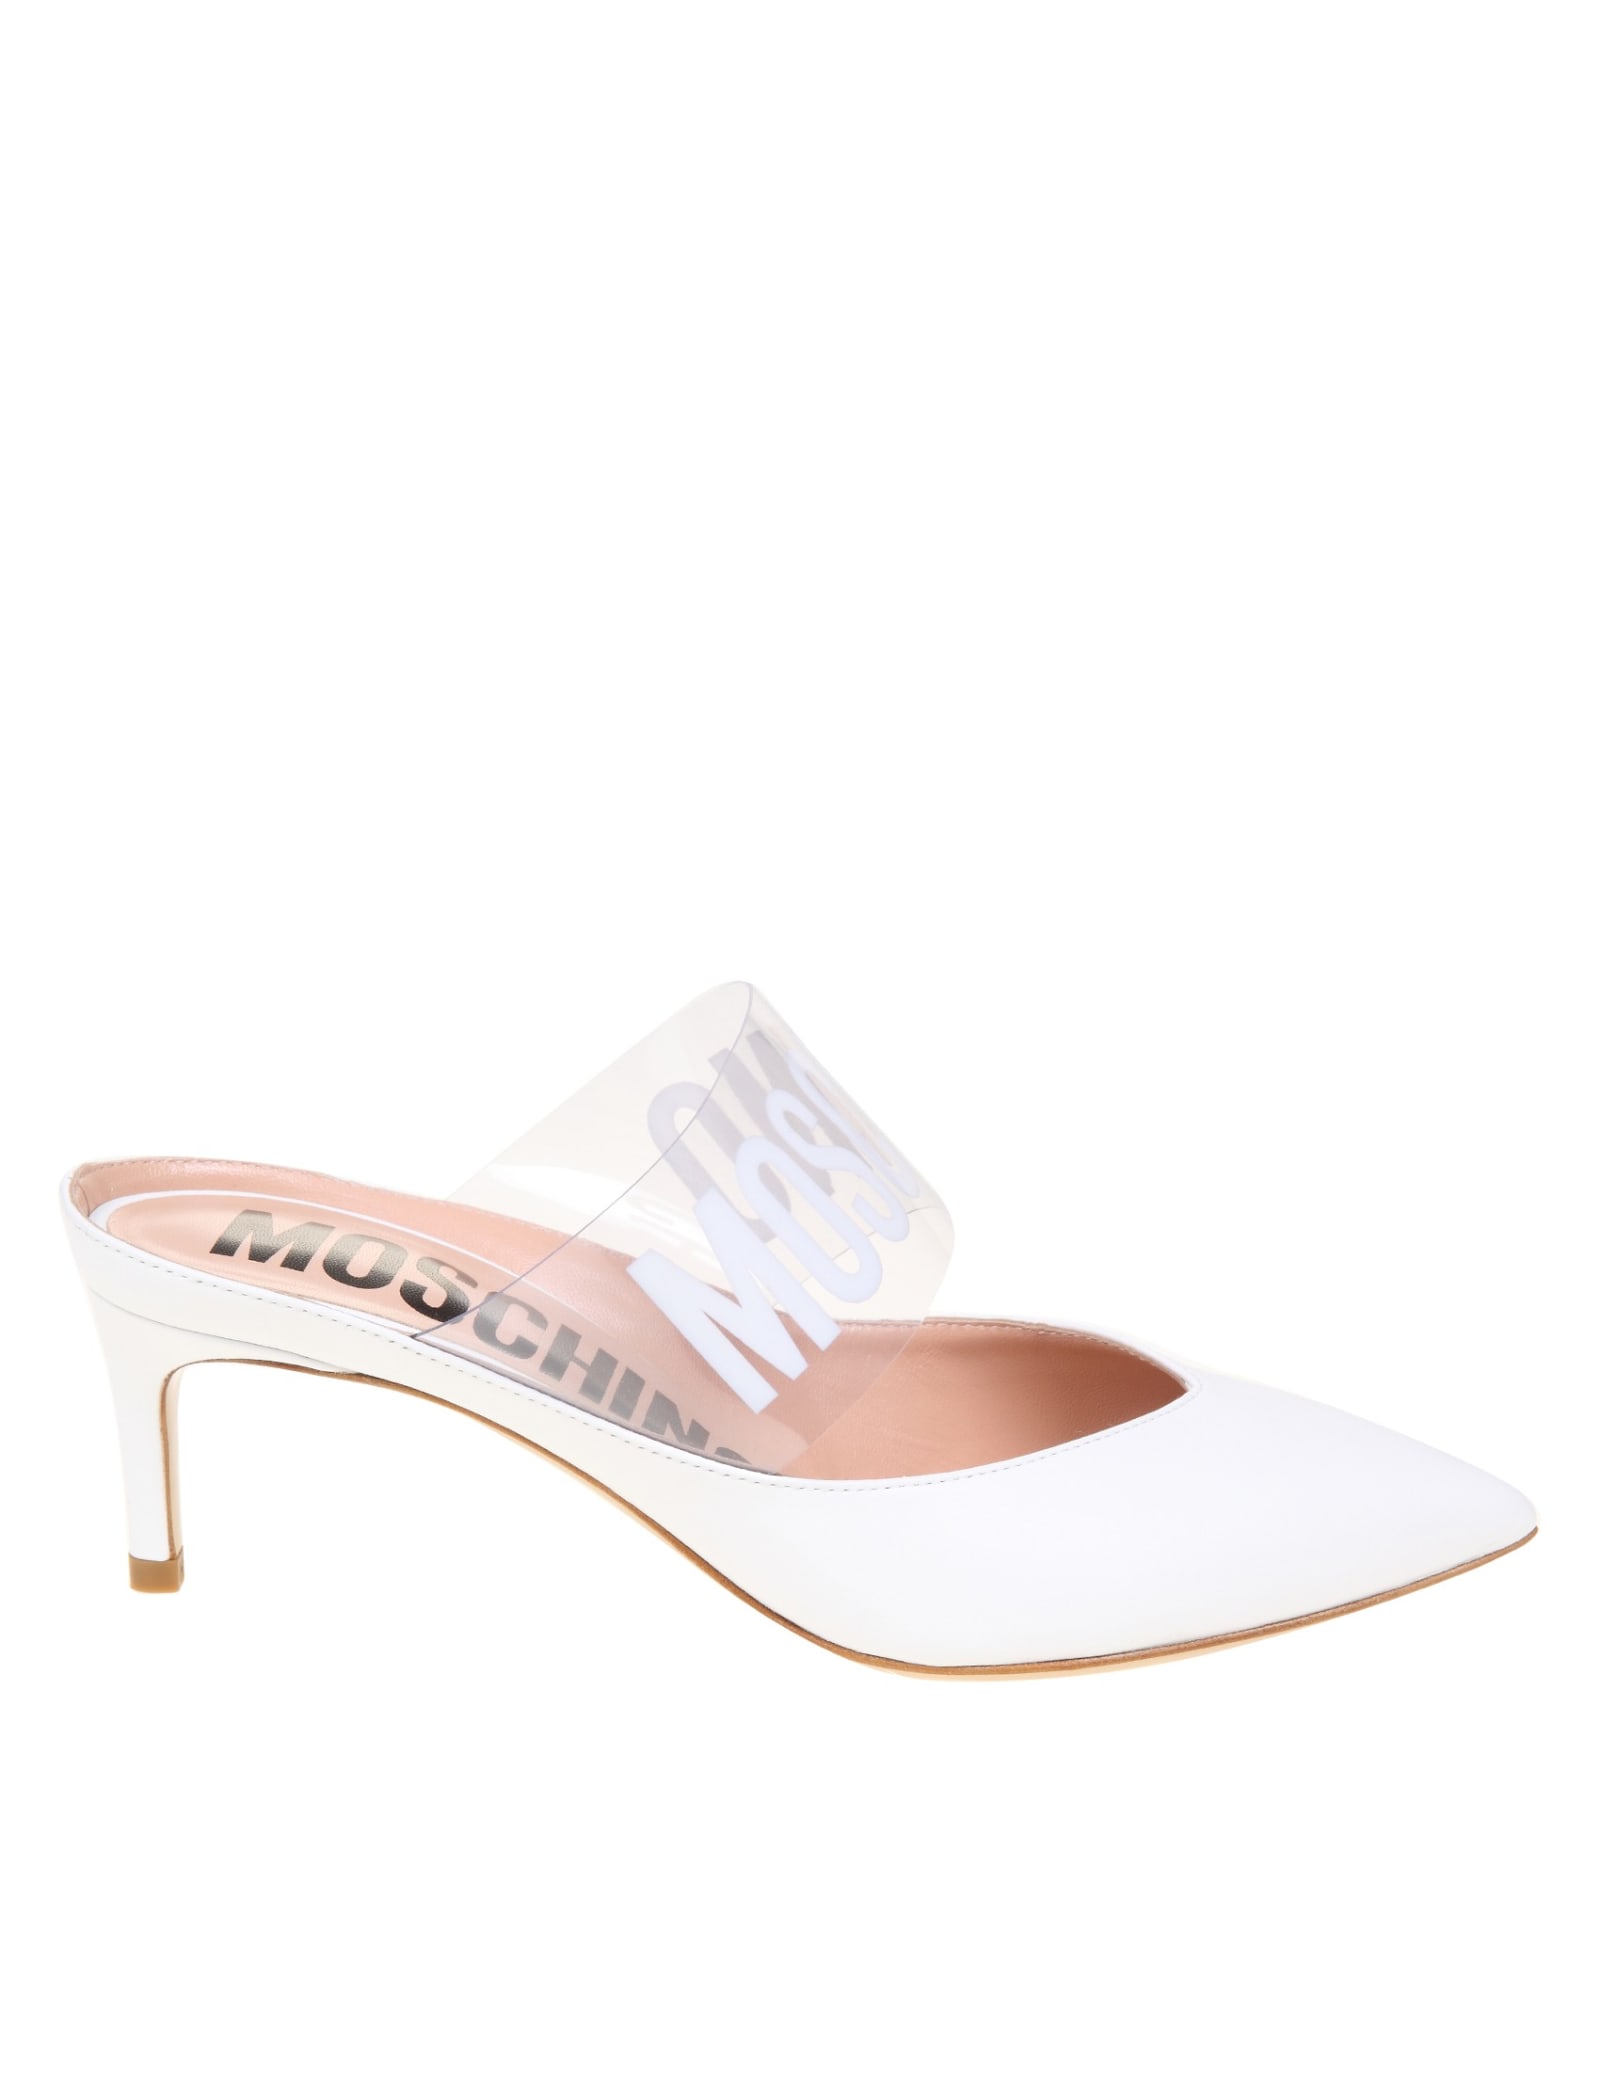 Buy Moschino Mules In White Leather online, shop Moschino shoes with free shipping